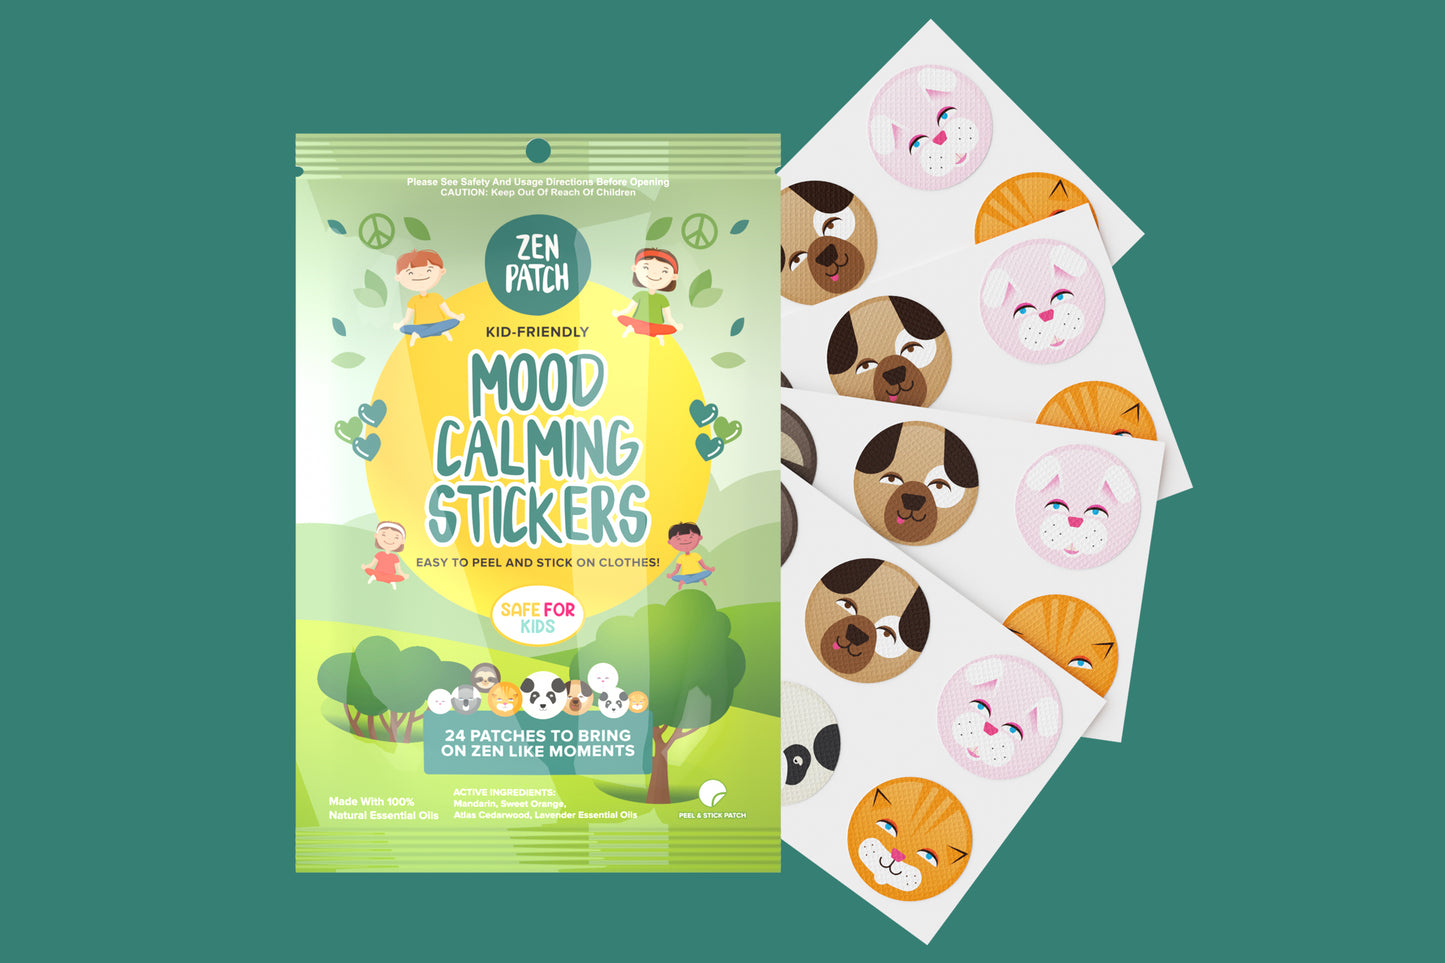 The Stress busting bundle - Mood calming patch & Sleepy patch